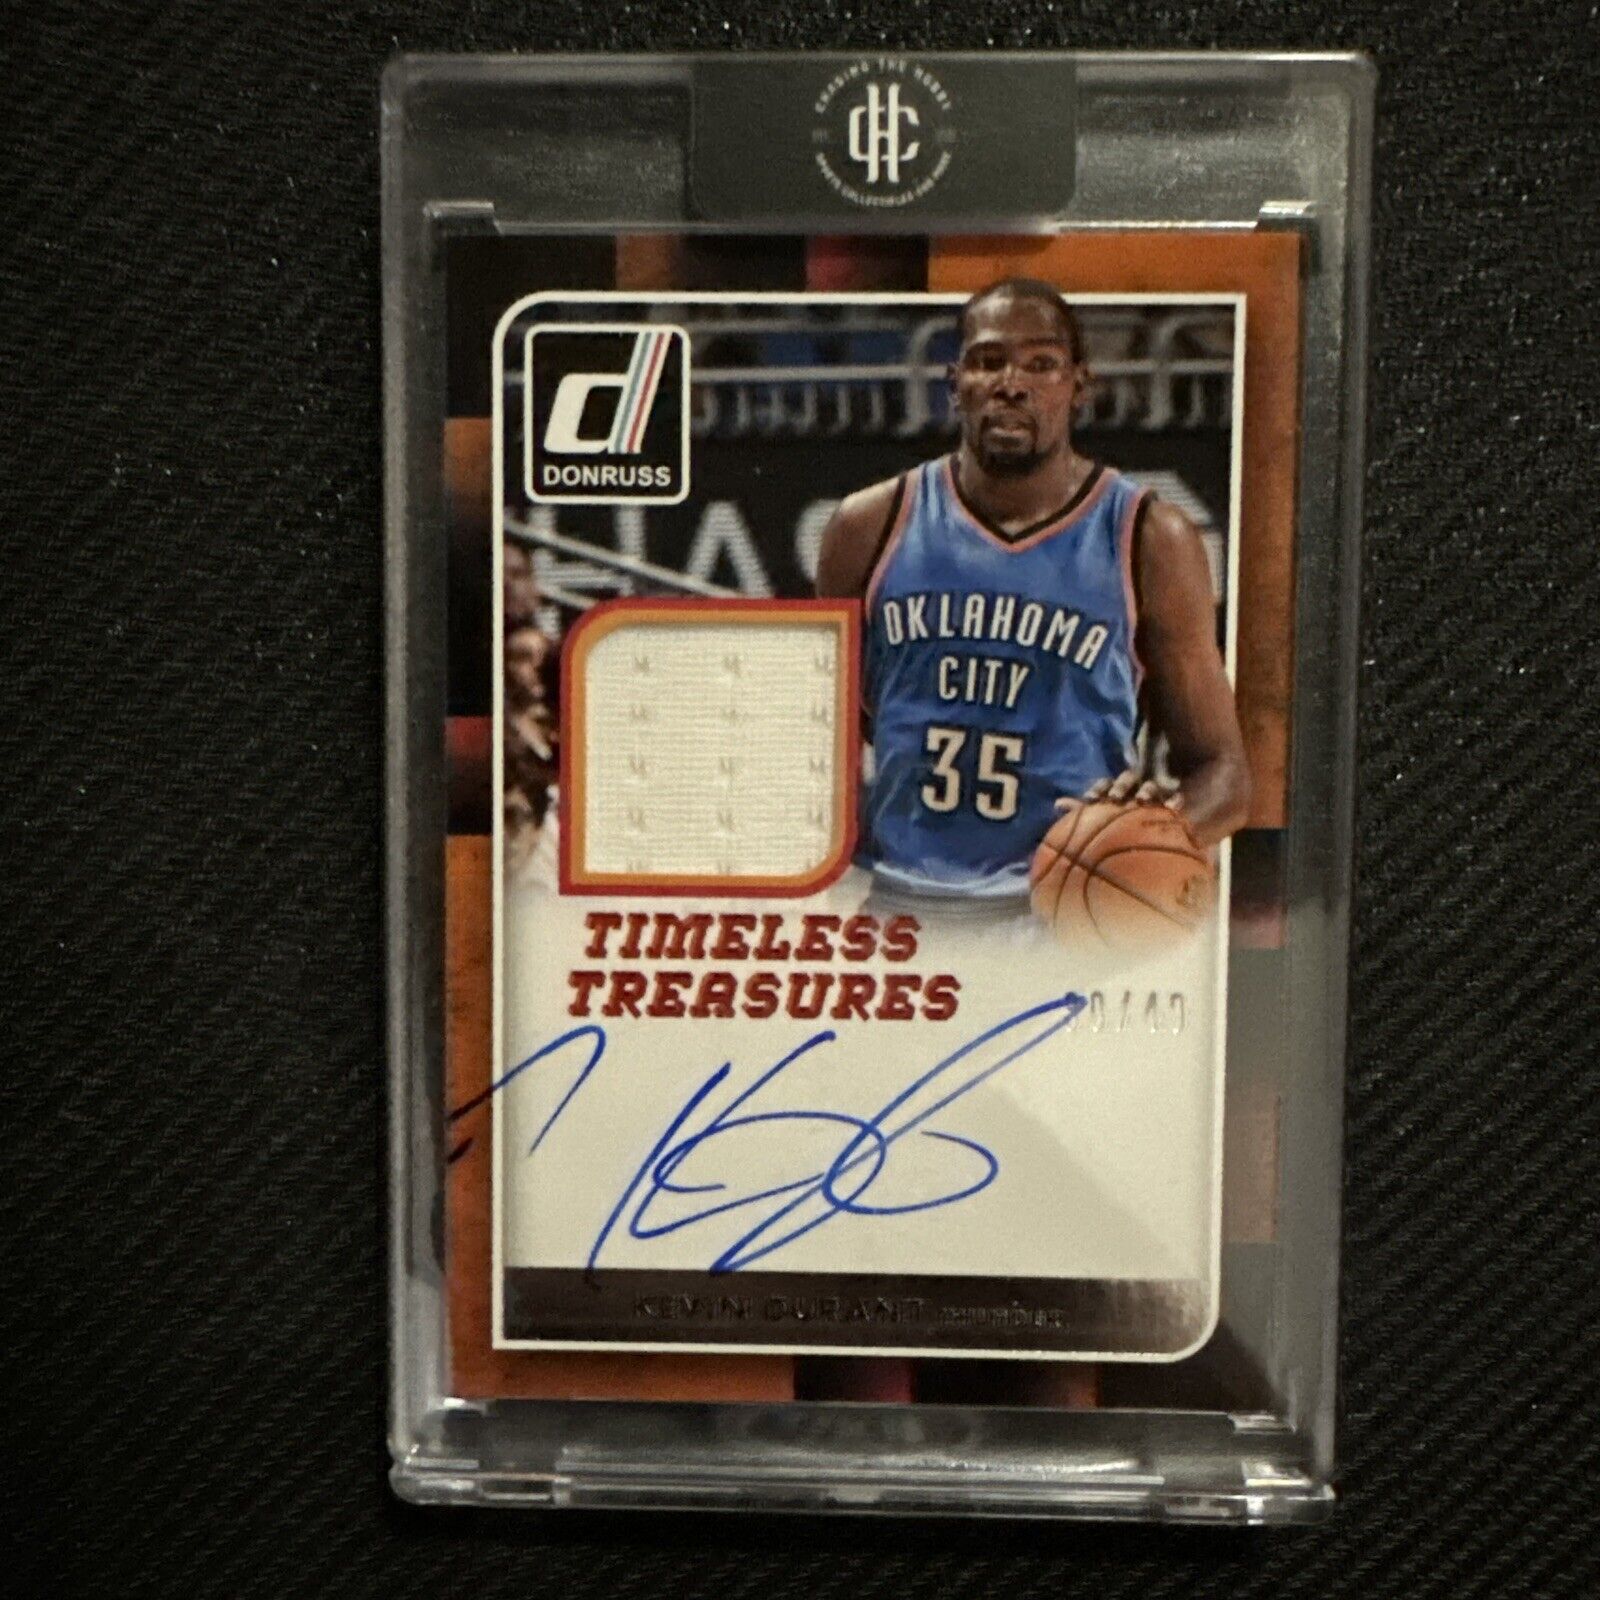 2015-16 Panini Donruss Kevin Durant Timeless Treasures GW Patch Auto /49 